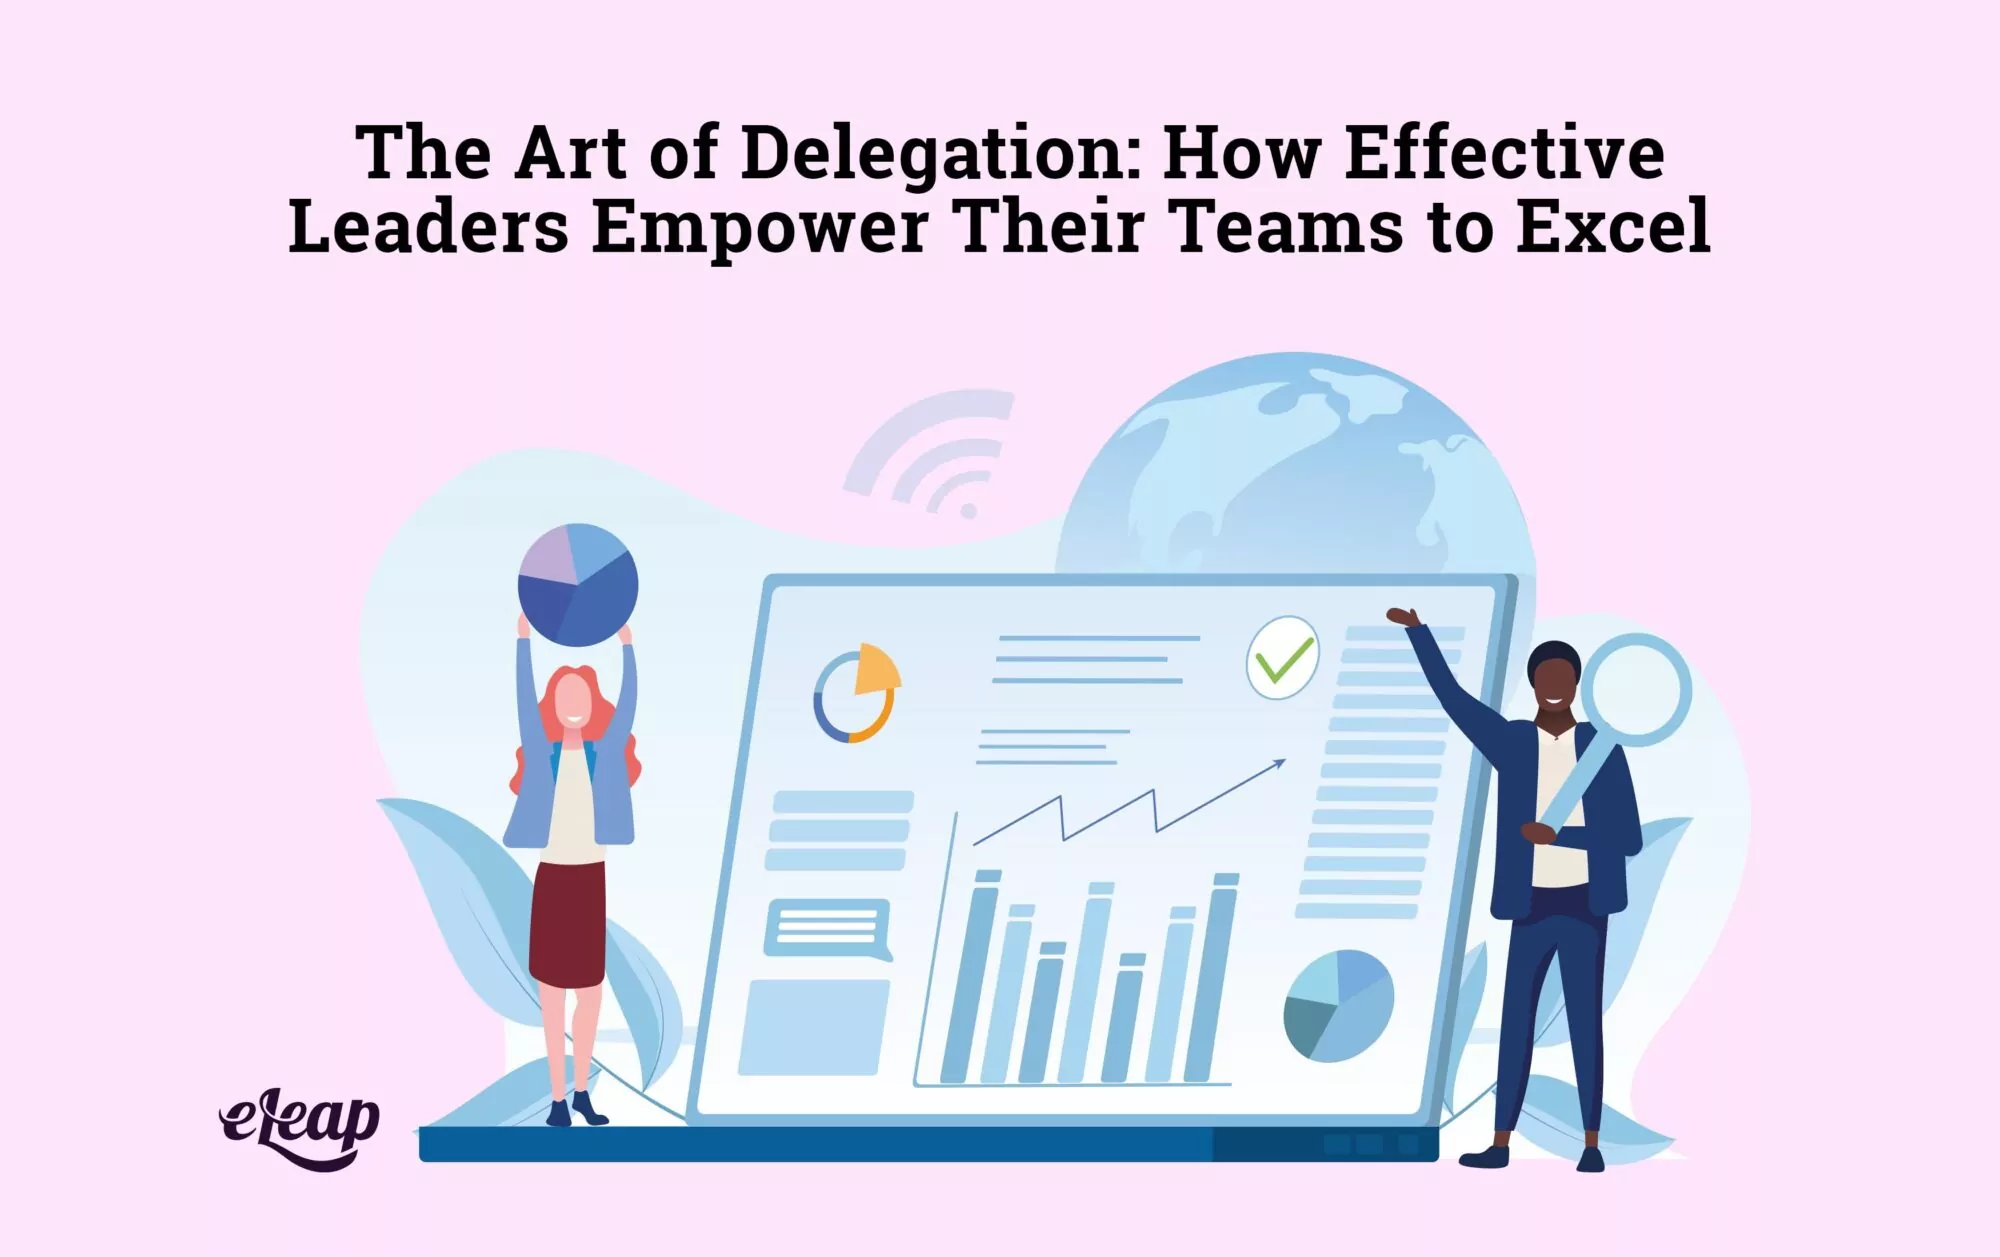 The Art of Delegation: How Effective Leaders Empower Their Teams to Excel